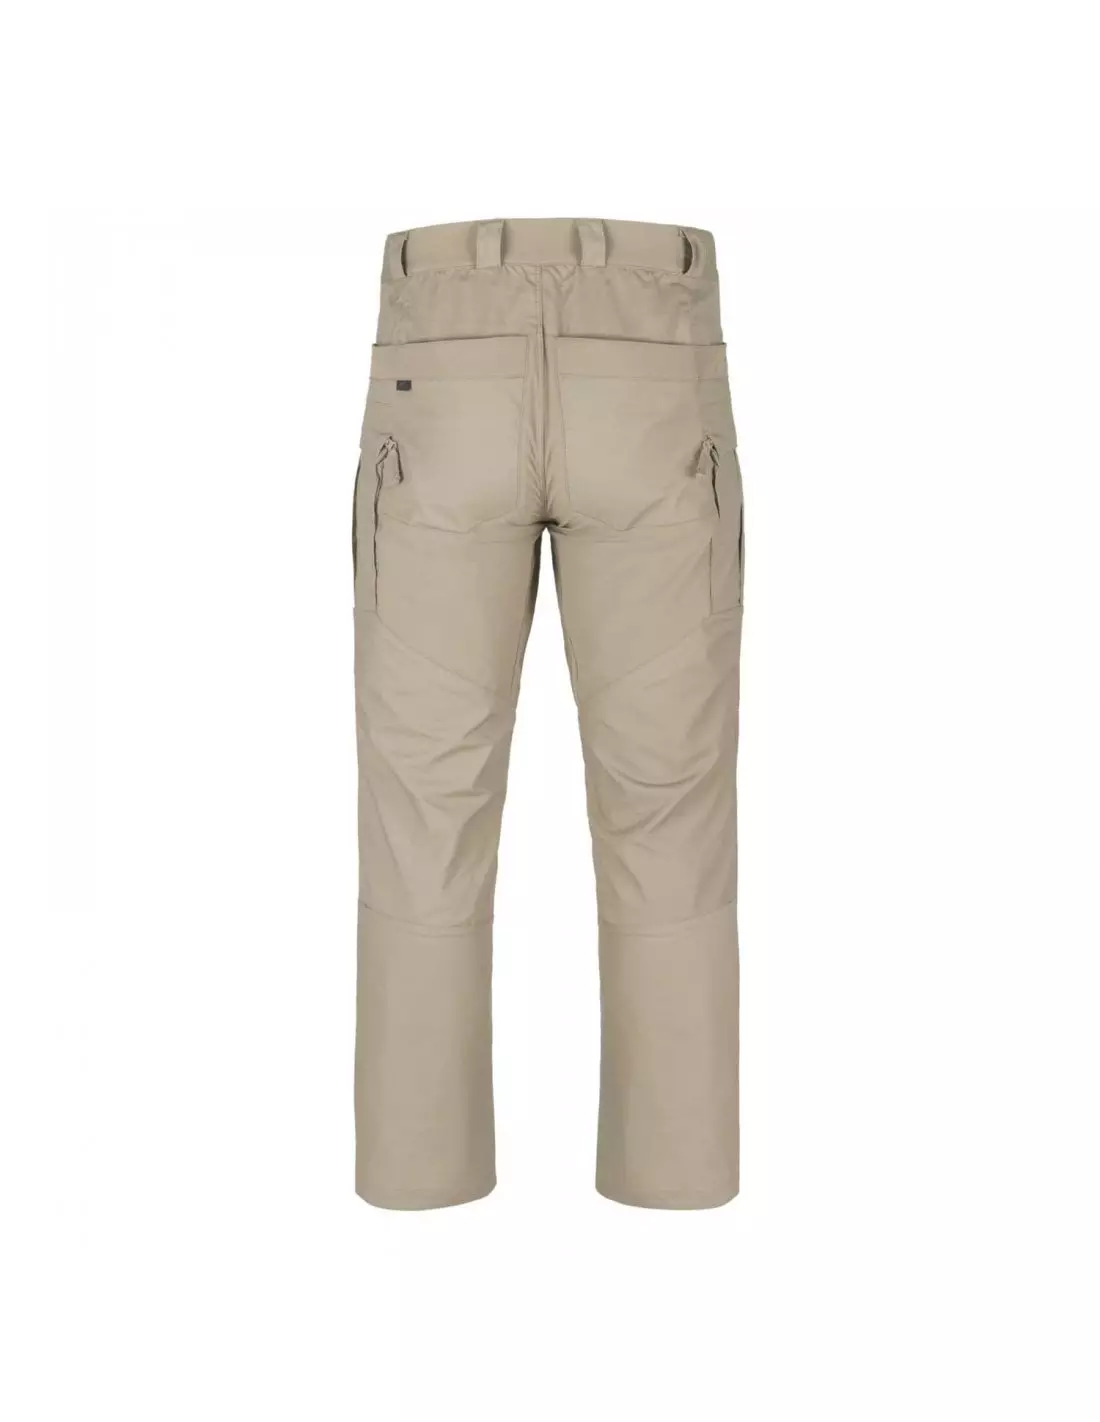 Hybrid Tactical Pants® in Khaki from Helikon-Tex®. hybrid ripstop